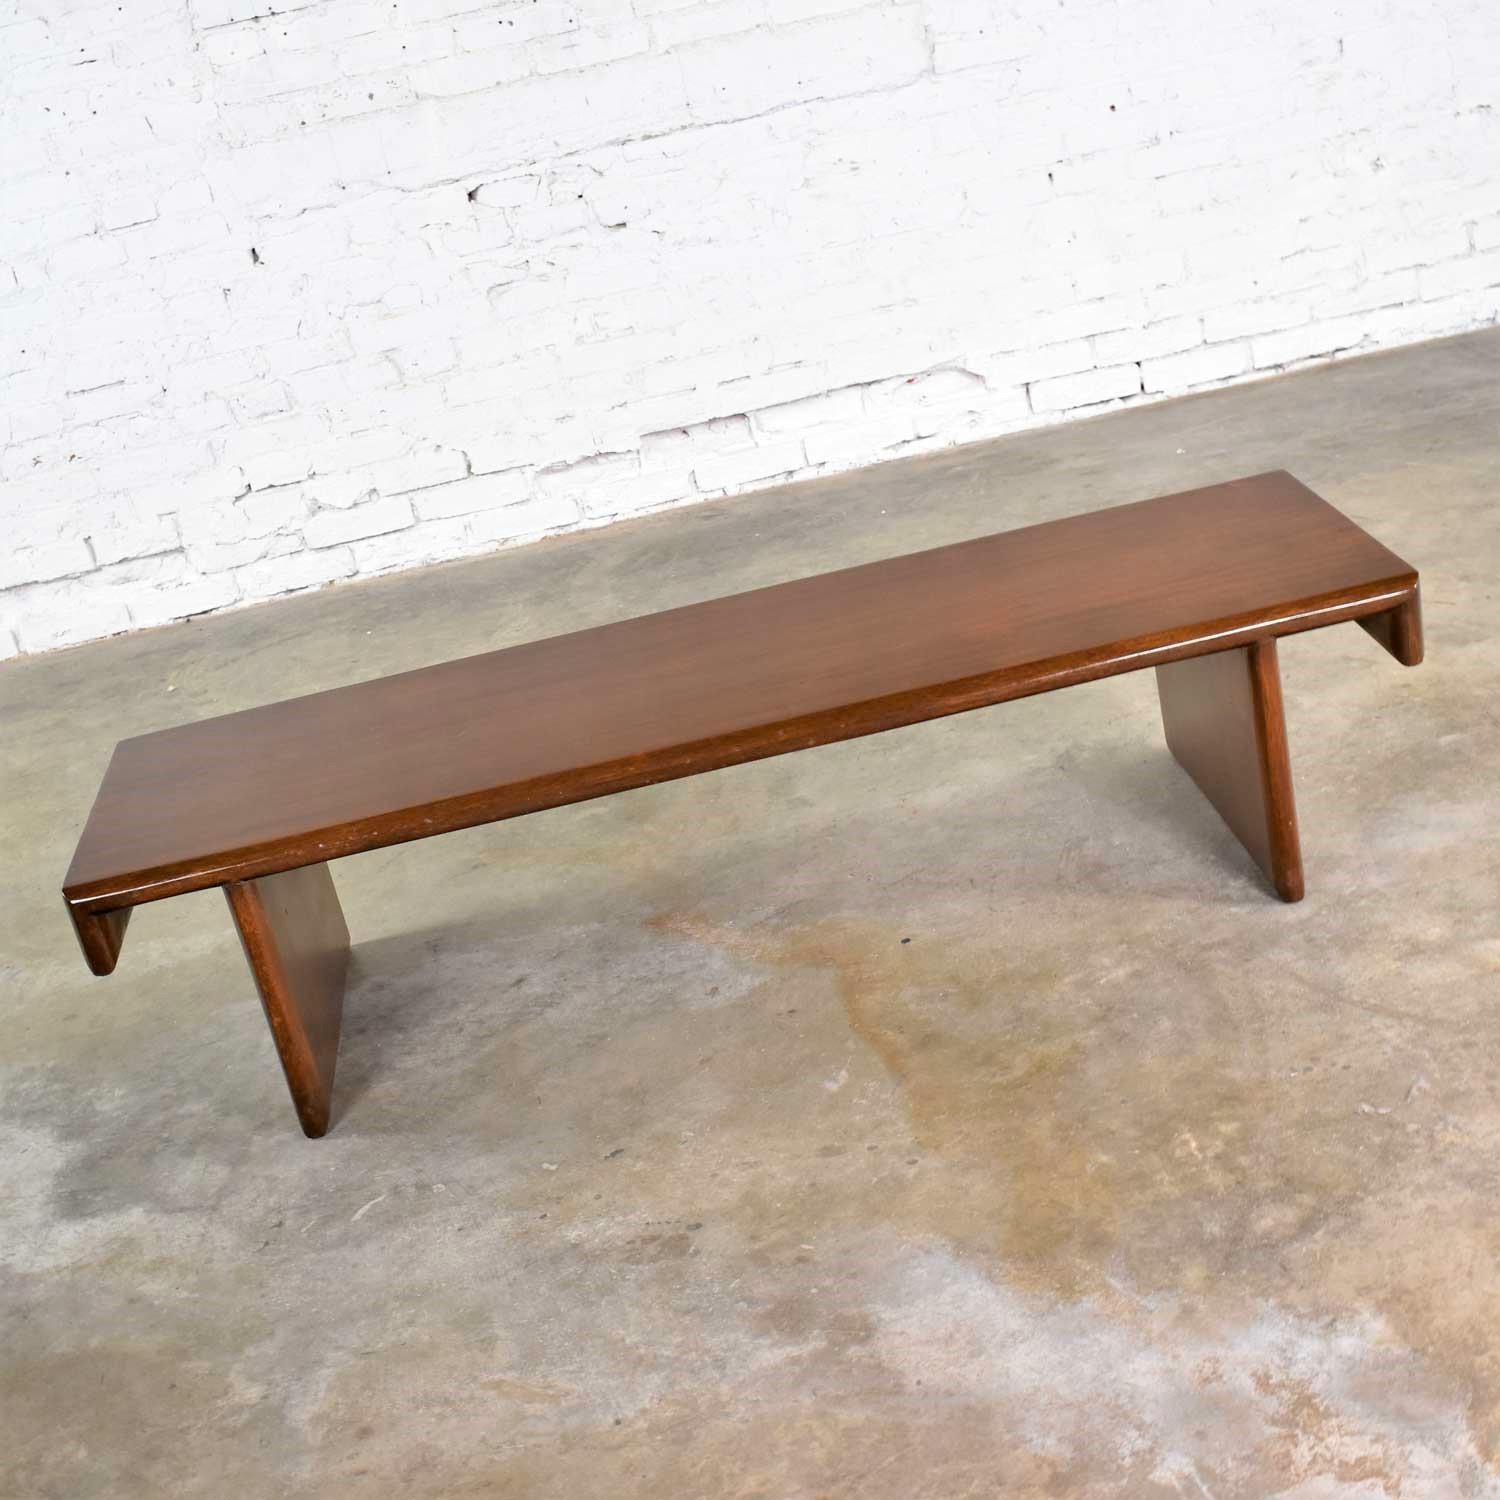 Handsome walnut stained mahogany bench or coffee table custom made in the style of Frank Lloyd Wright for Henredon. It is in wonderful original vintage condition. It does have some signs of age including small scratches and nicks and dings; but